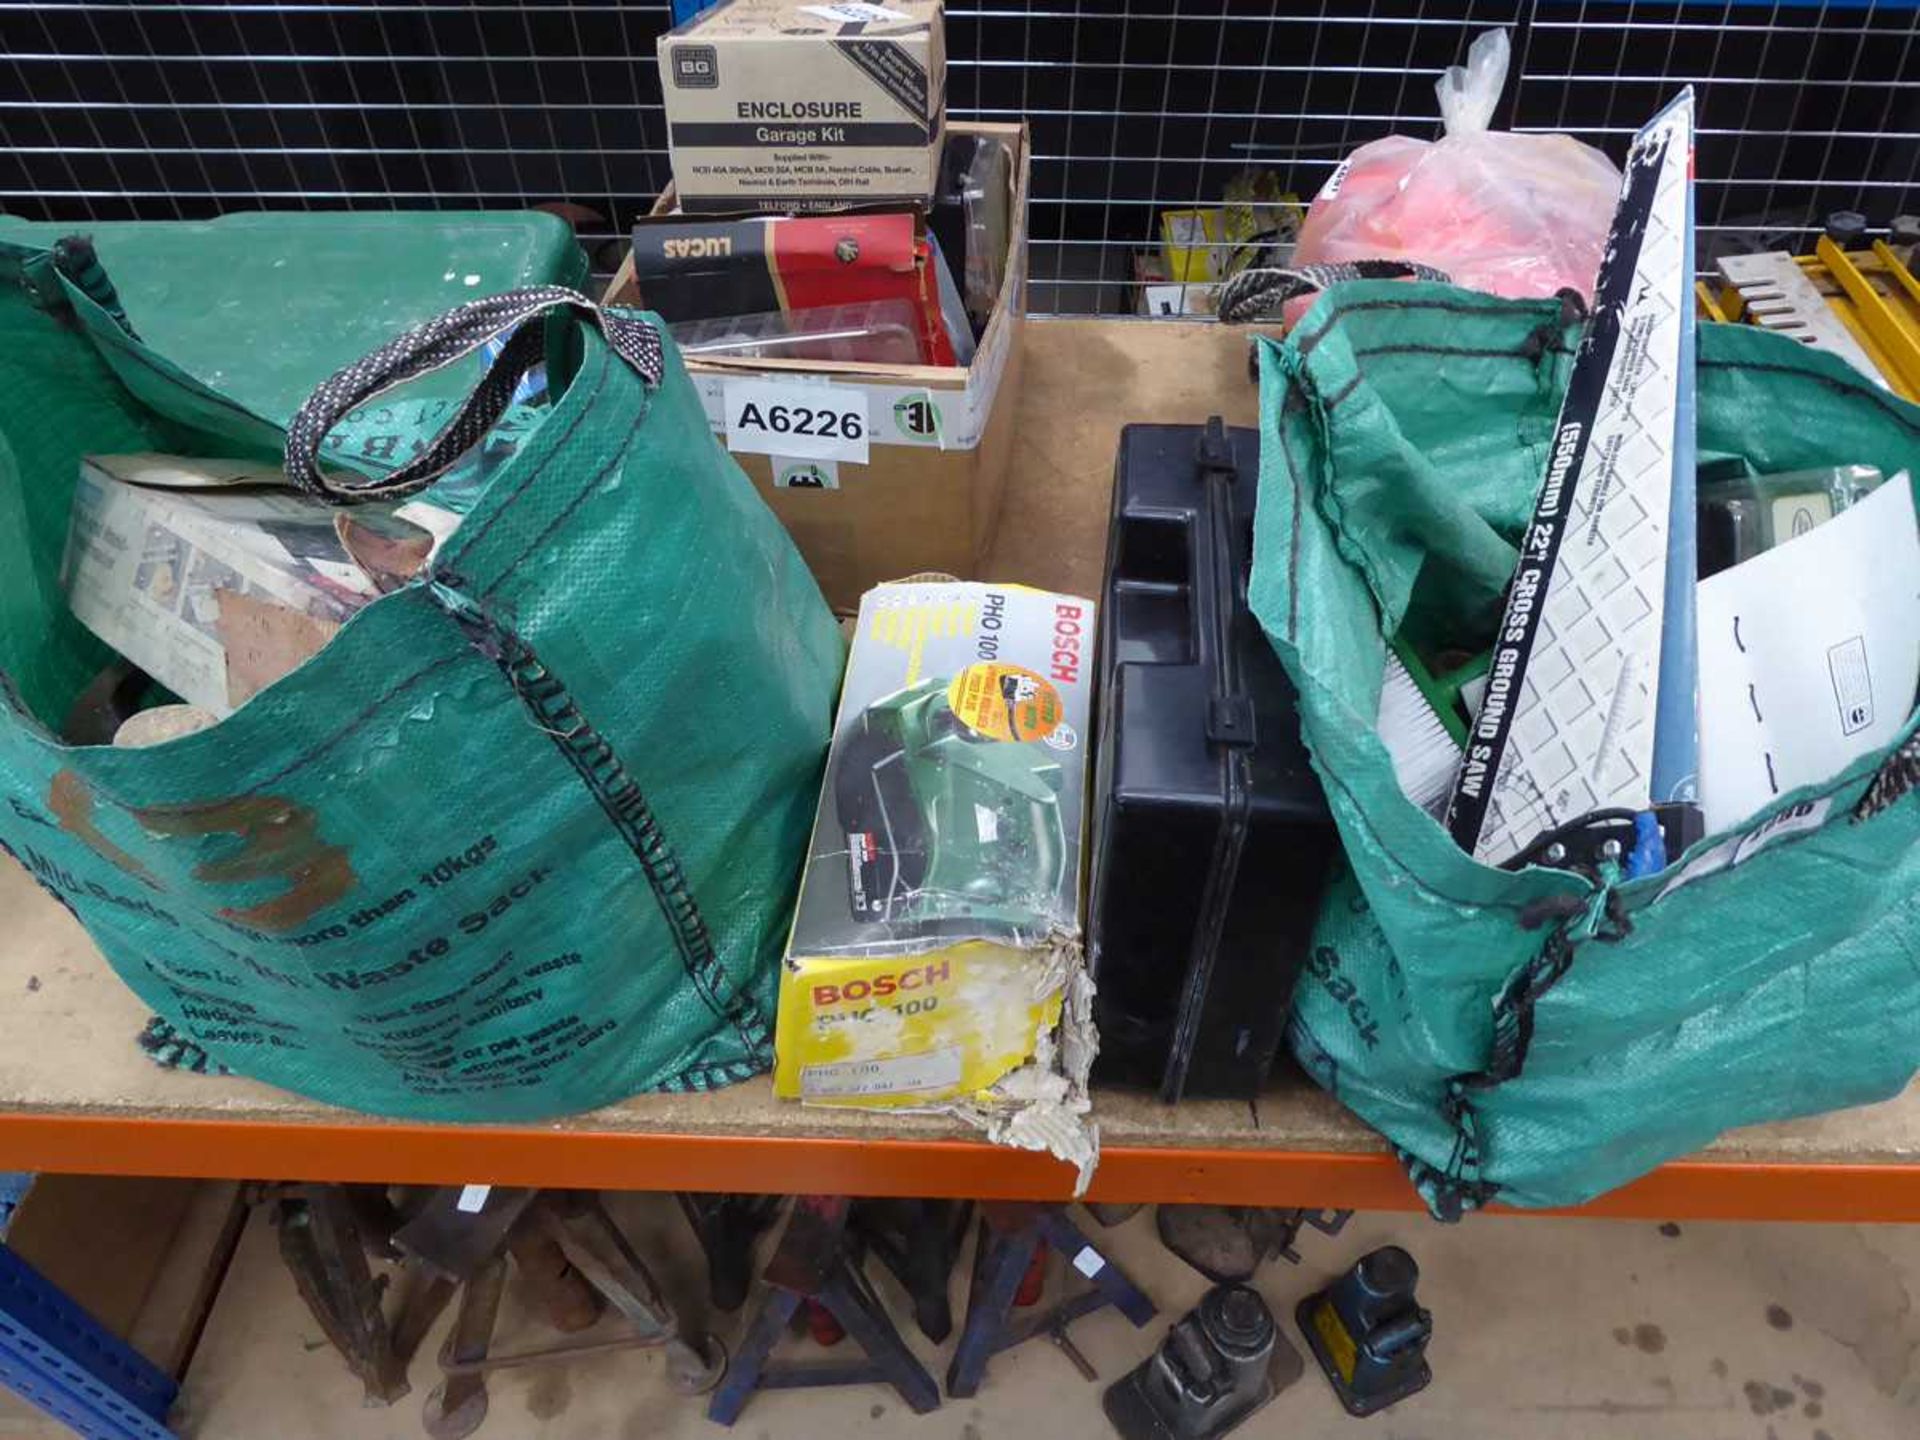 2 bags of assorted tools inc. saws, planers, drills, tile cutters and various other tools